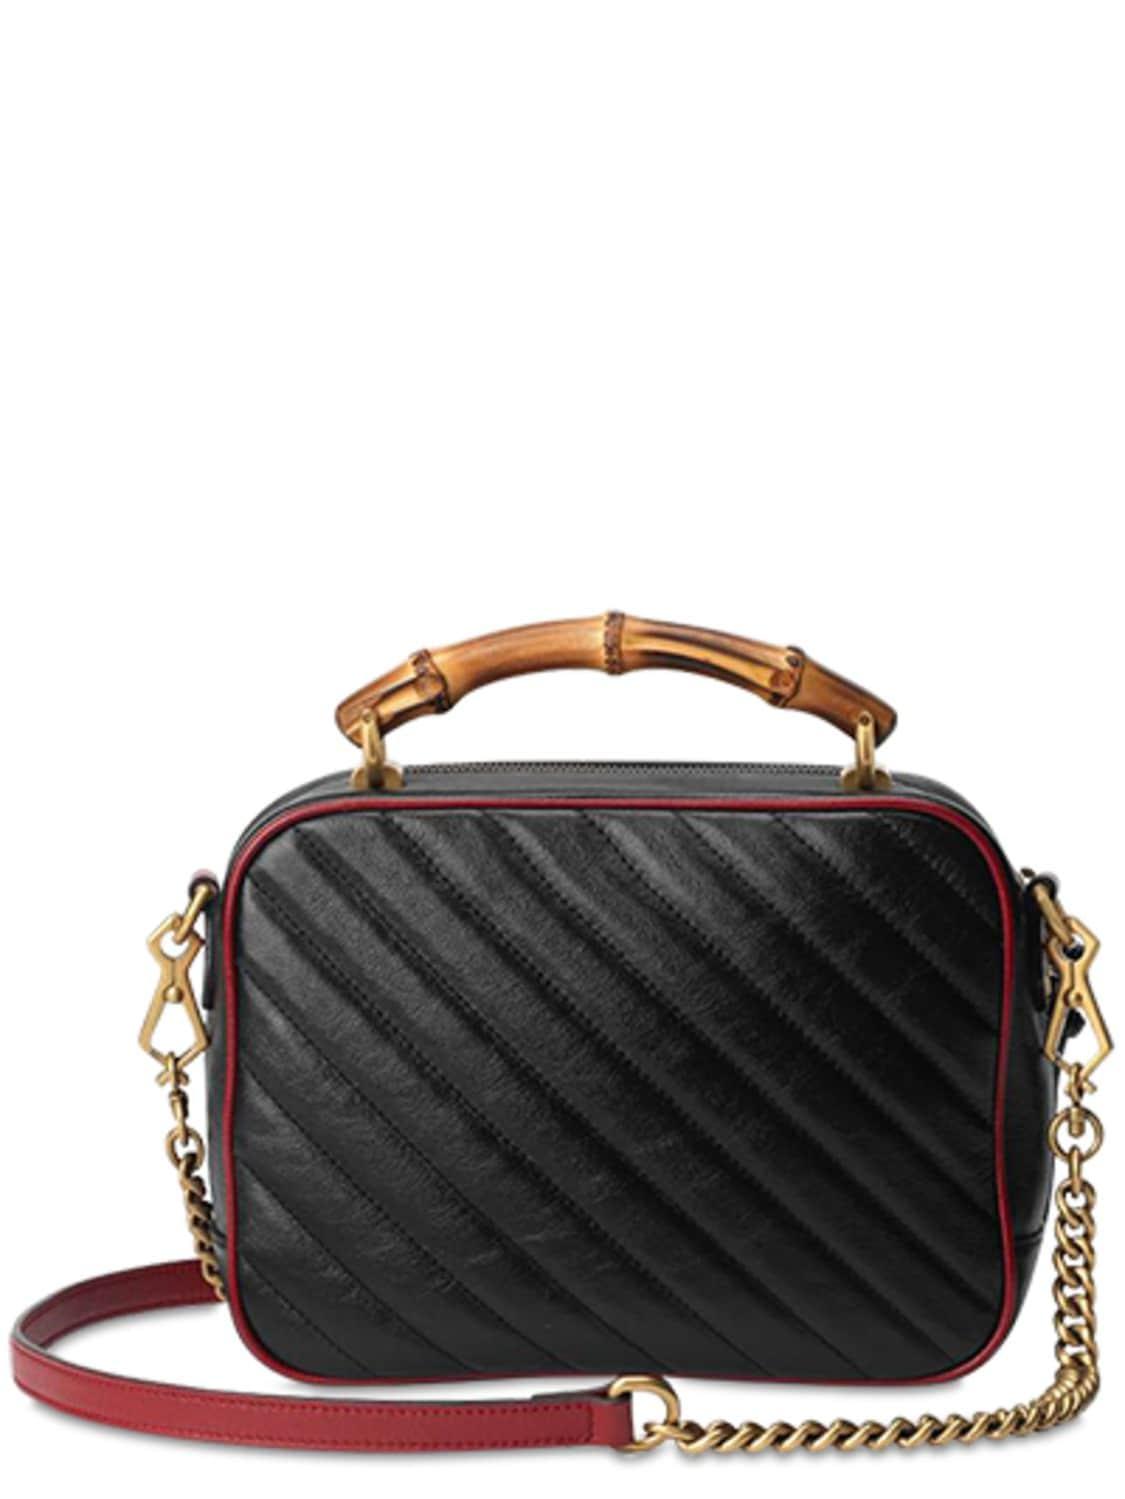 Gucci Leather Bamboo Handle Marmont Shoulder Bag in Black/Red (Black) | Lyst